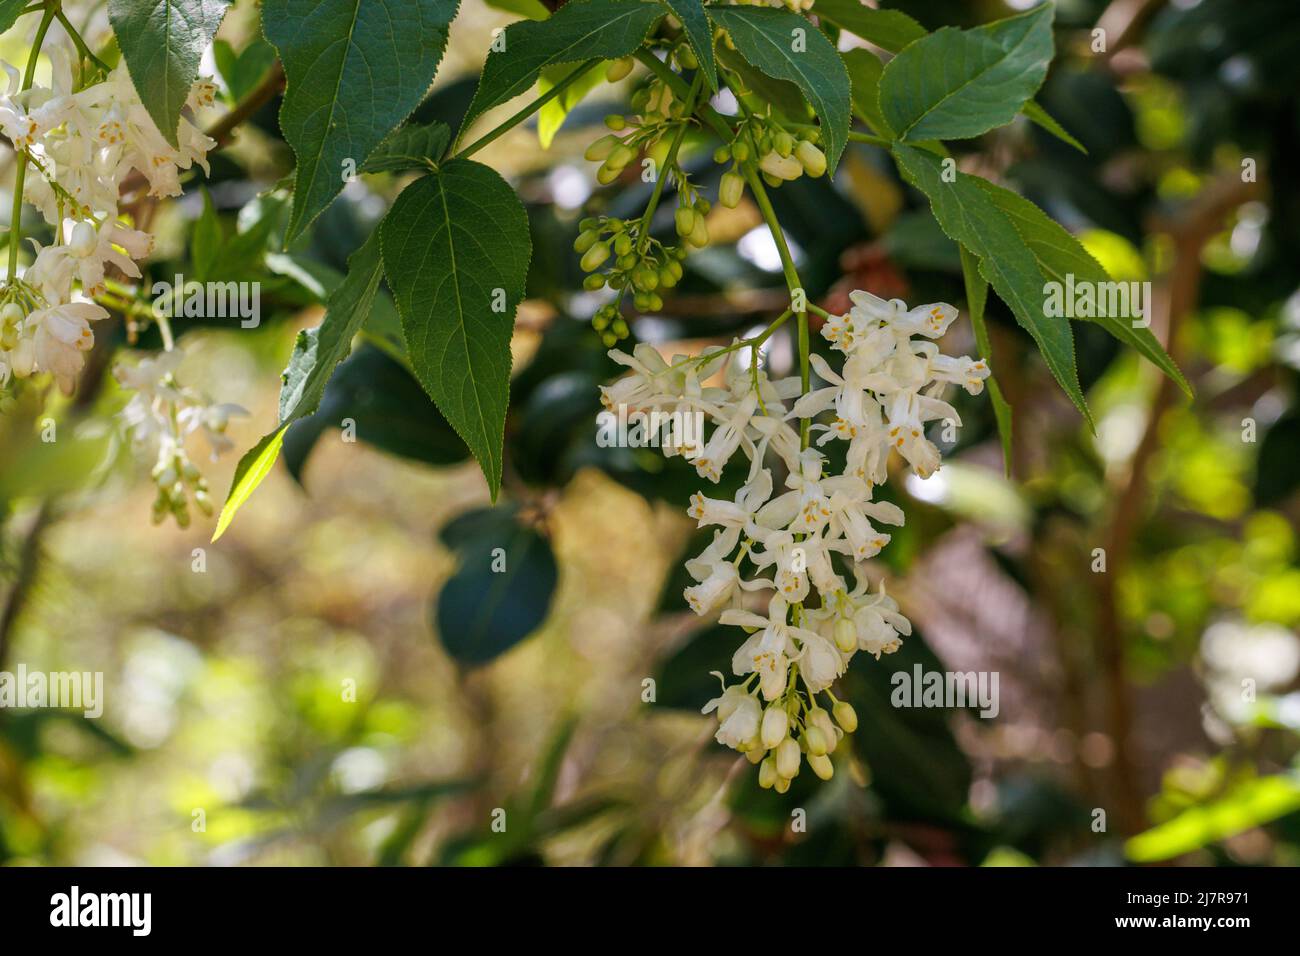 Hanging Staphylea colchicha flowers in spring Stock Photo